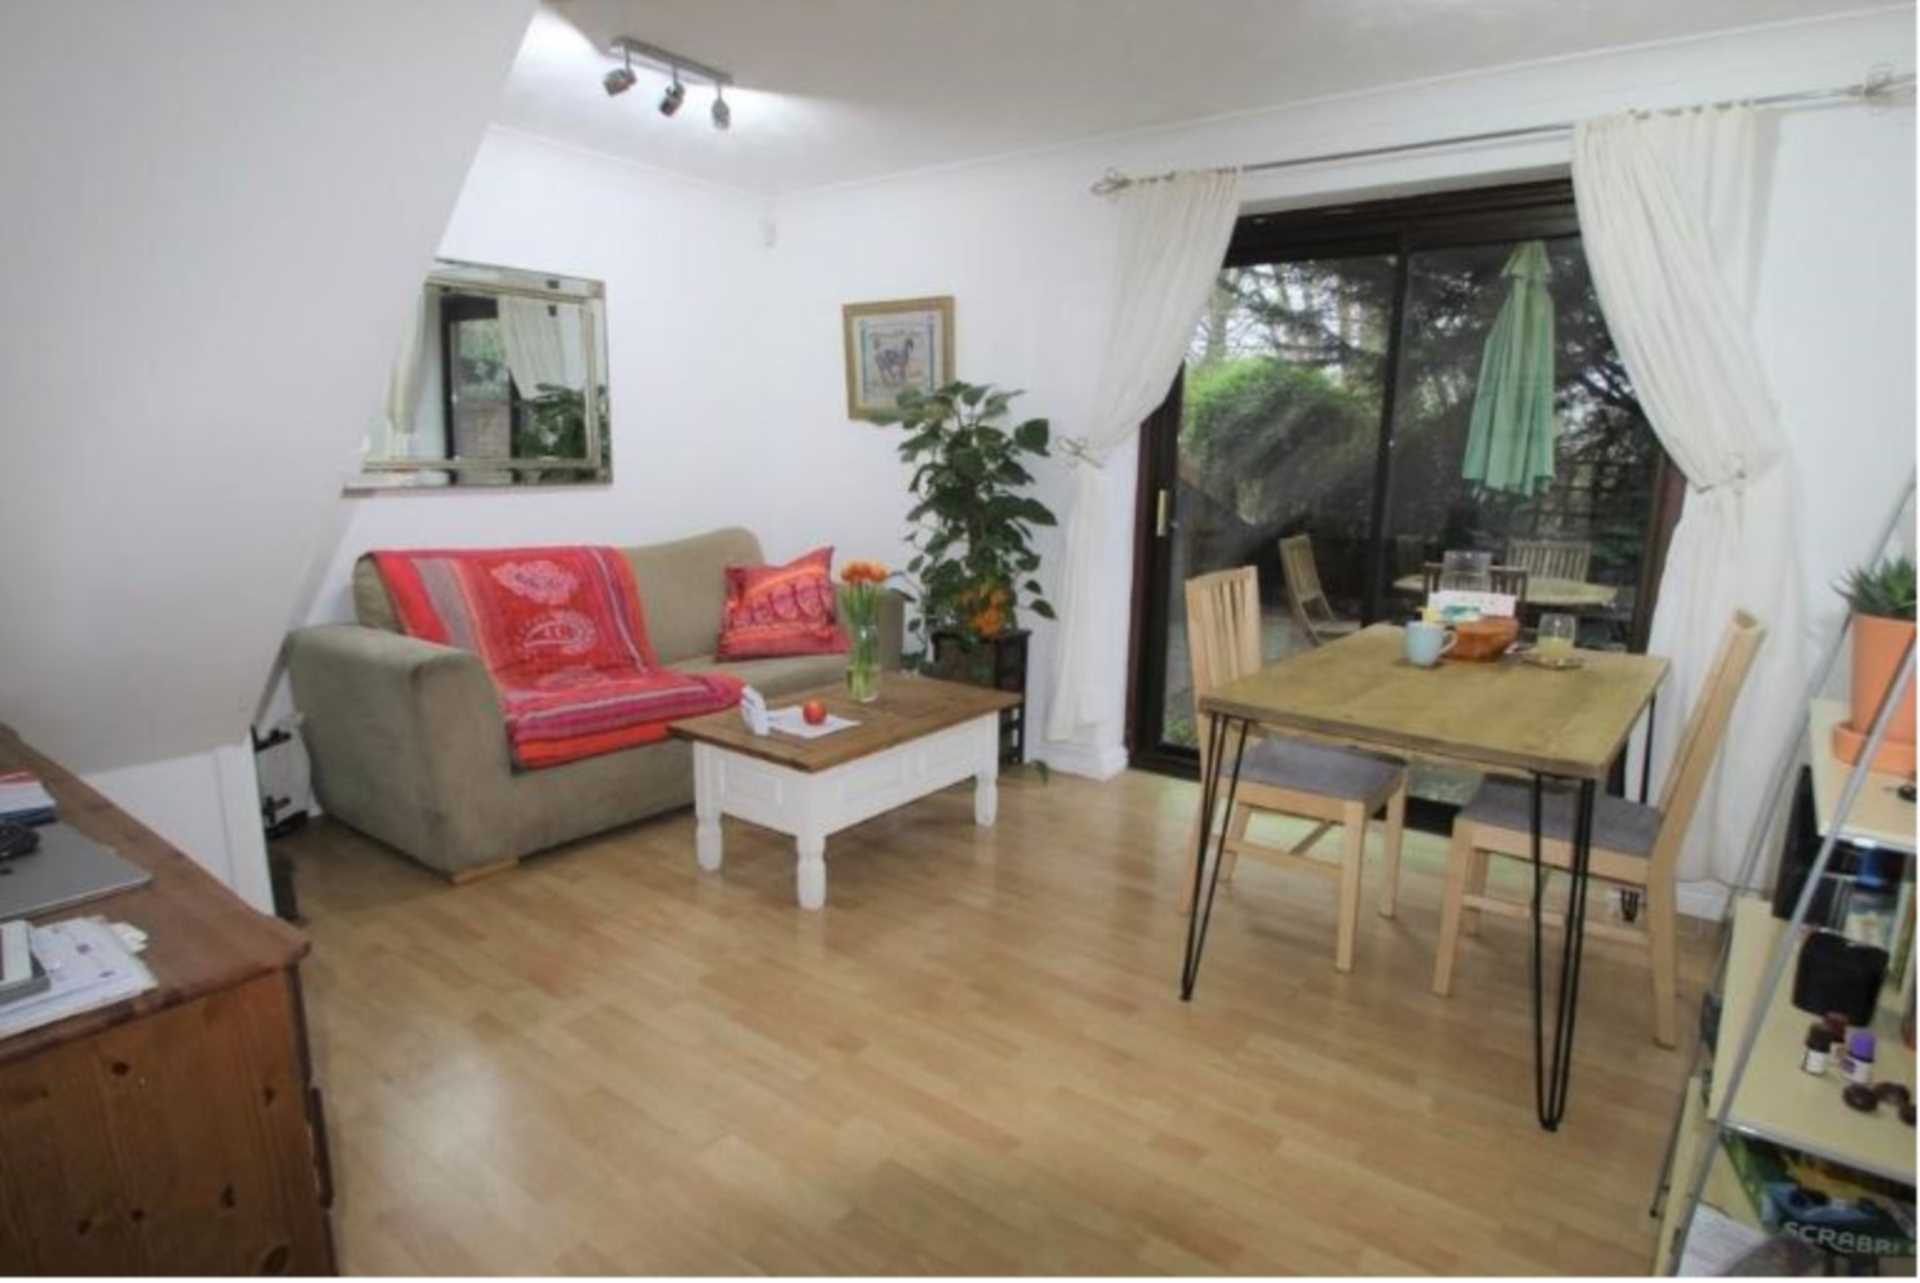 2 bed End Terraced House for rent in Oxford. From James C Penny Estate Agents - Central North Oxford